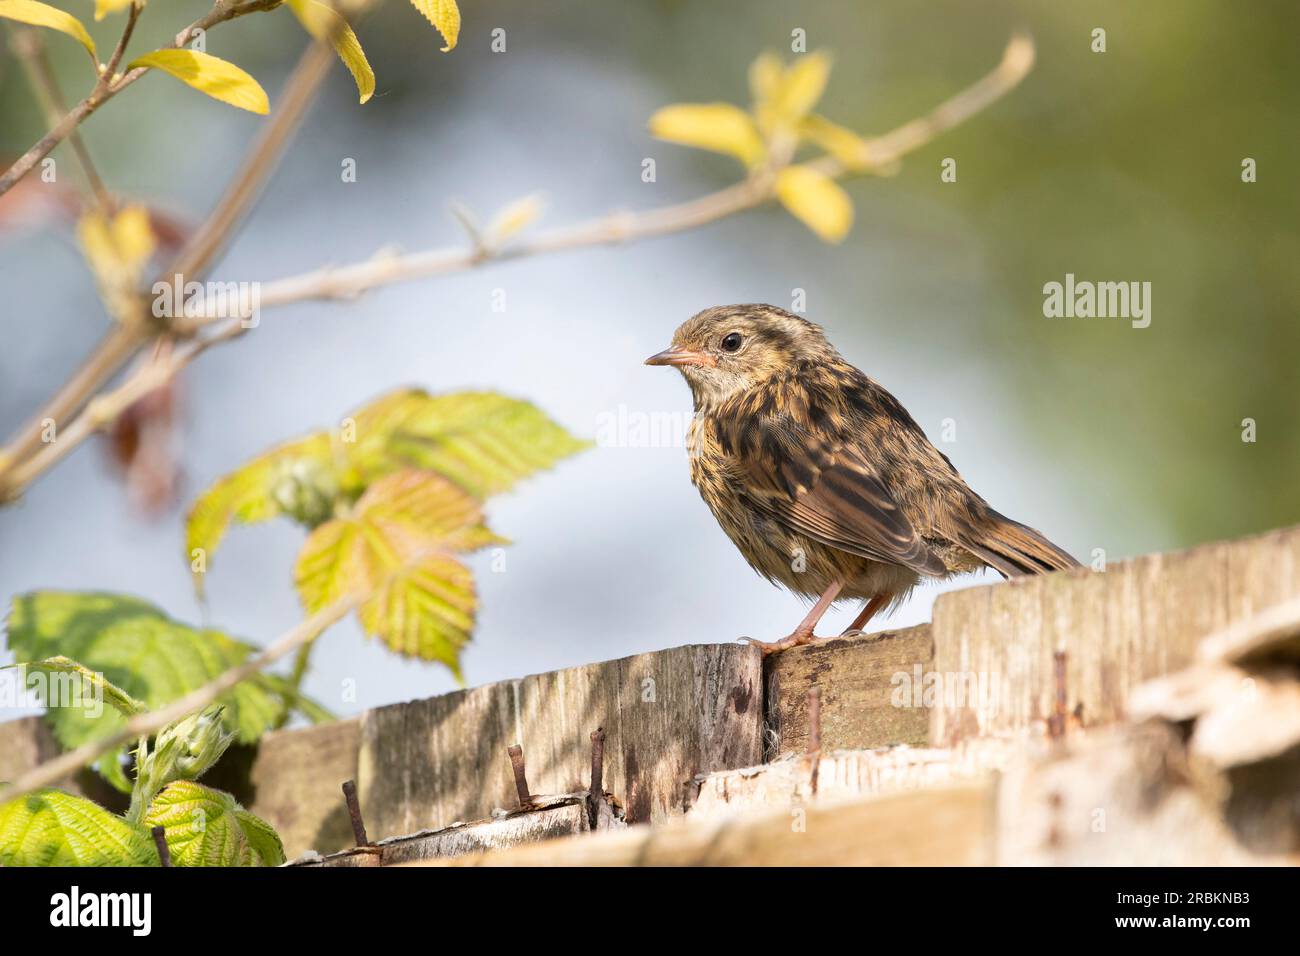 dunnock (Prunella modularis), juvenile perched on a fench in the garden, Netherlands Stock Photo